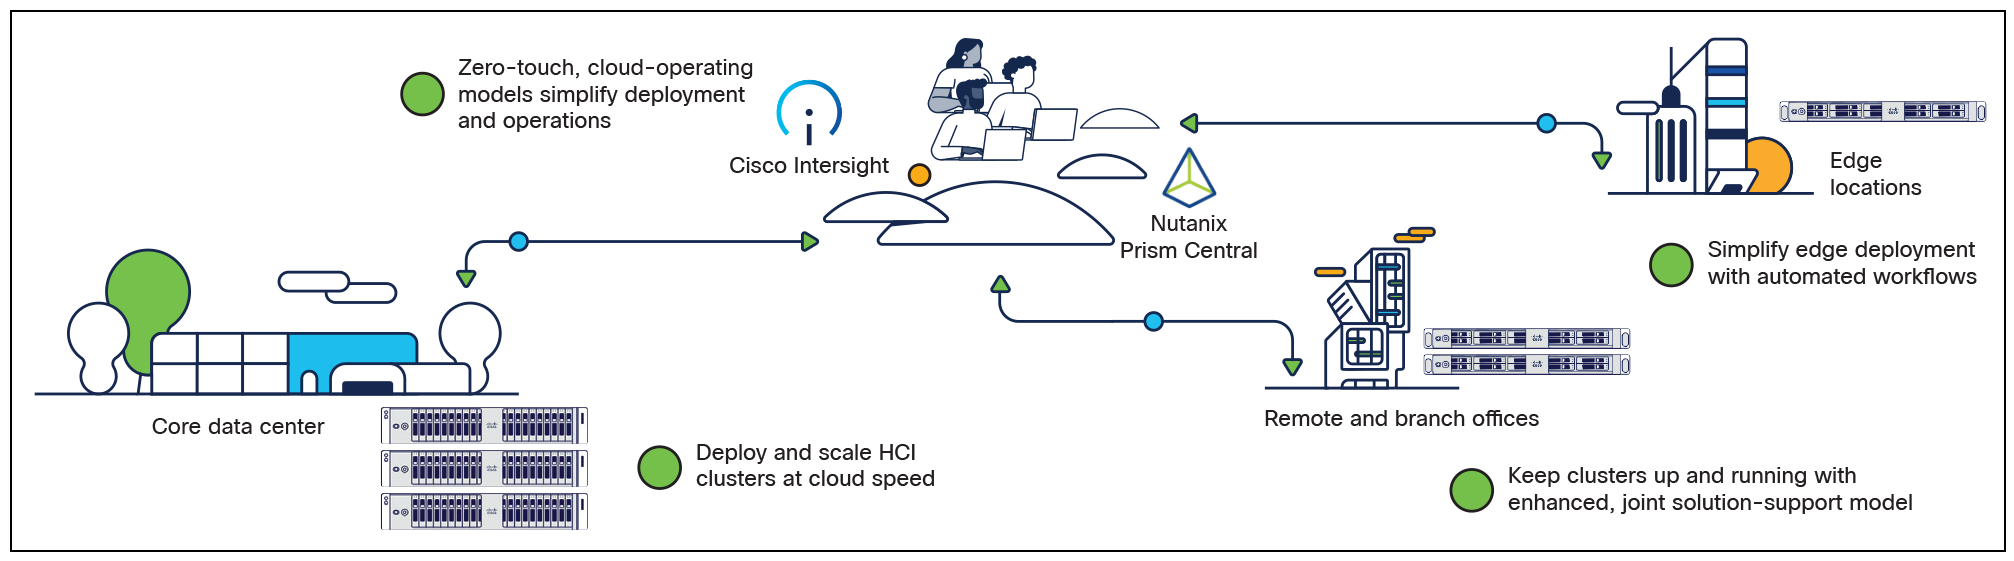 Simplify and scale deployments with Cisco Compute Hyperconverged with Nutanix solution